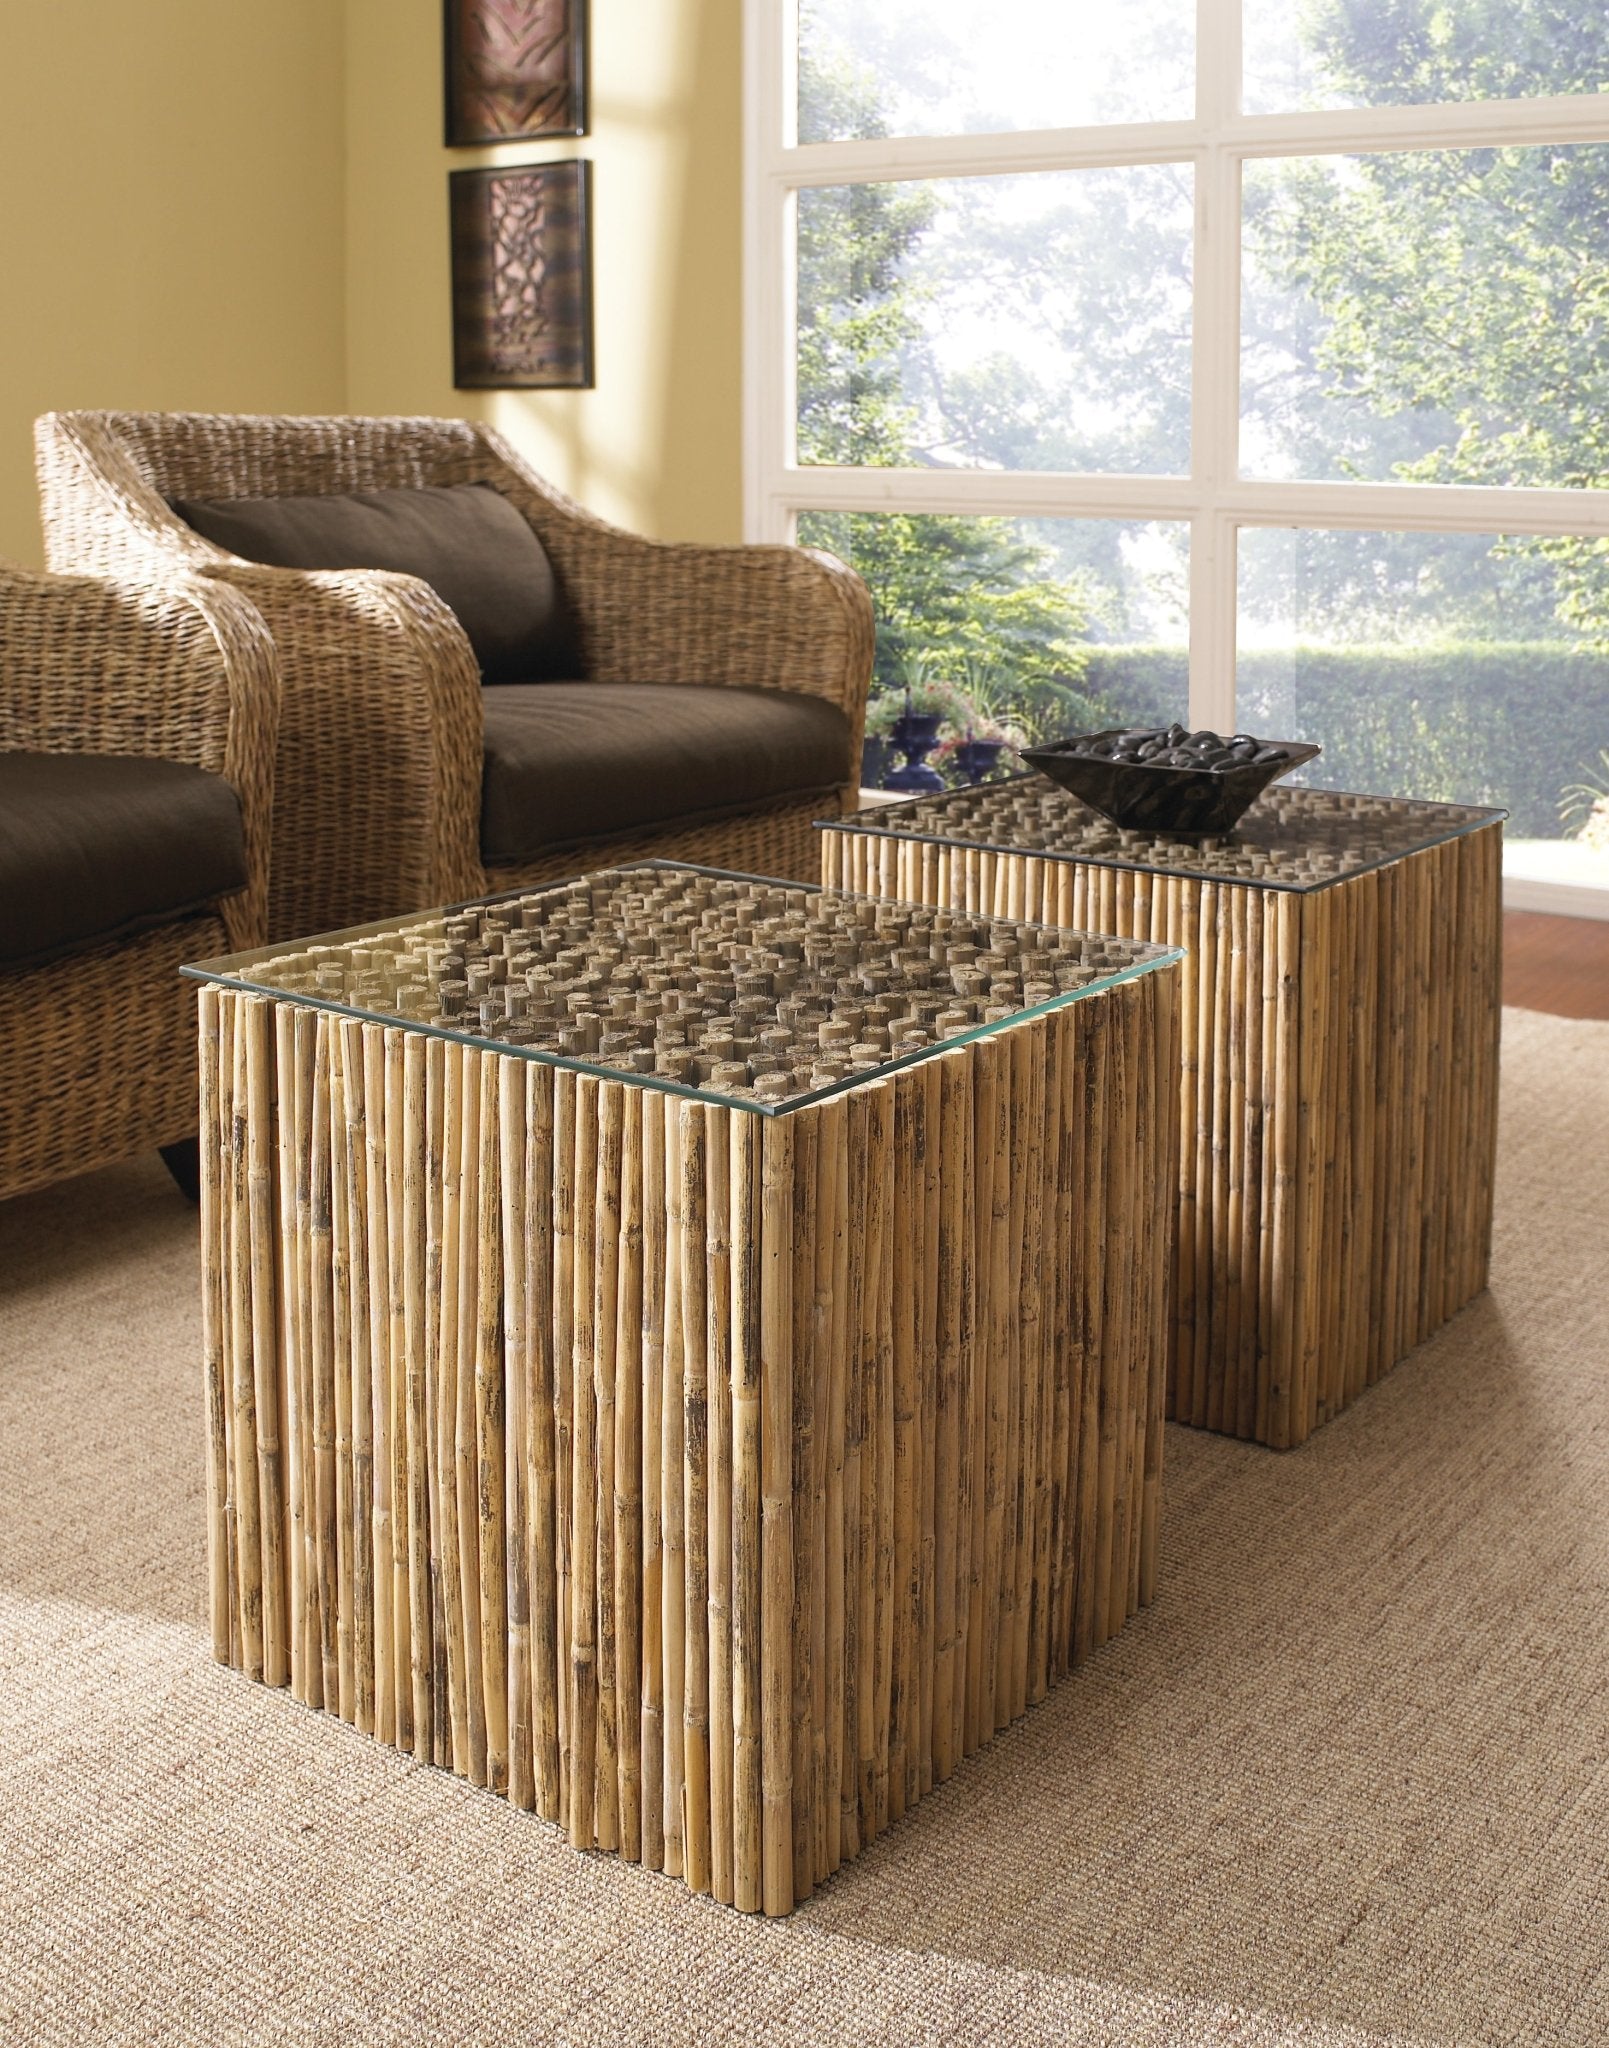 Padma's Plantation Bamboo Stick Bunching Table With Glass